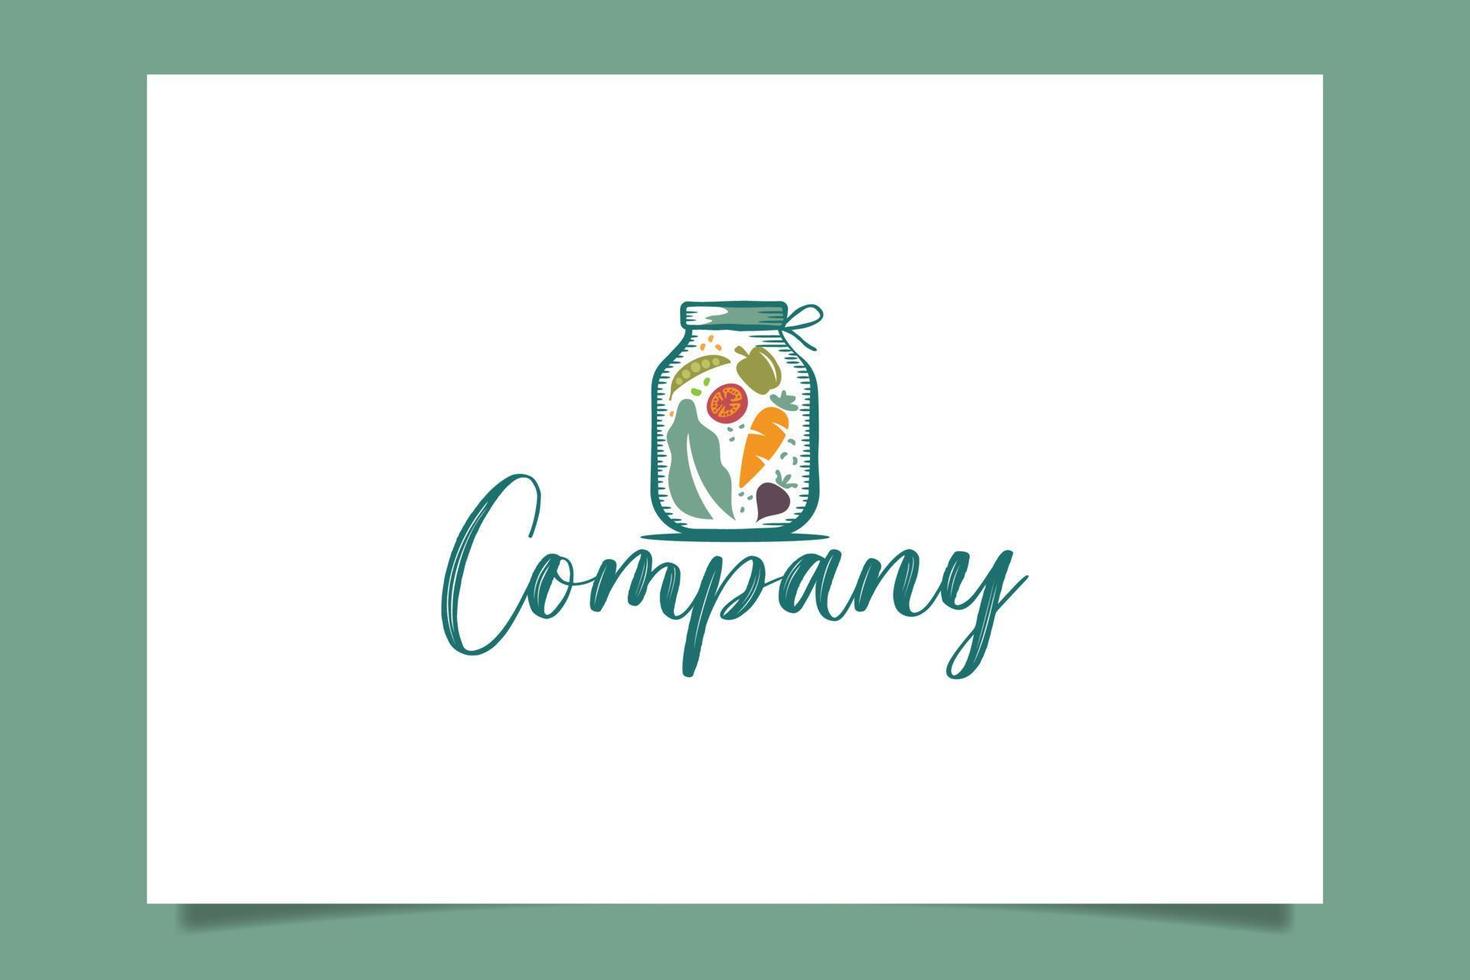 Salad in a jar logo with vintage style for any business, especially food and beverage, restaurant, cafe, vegan, etc. vector